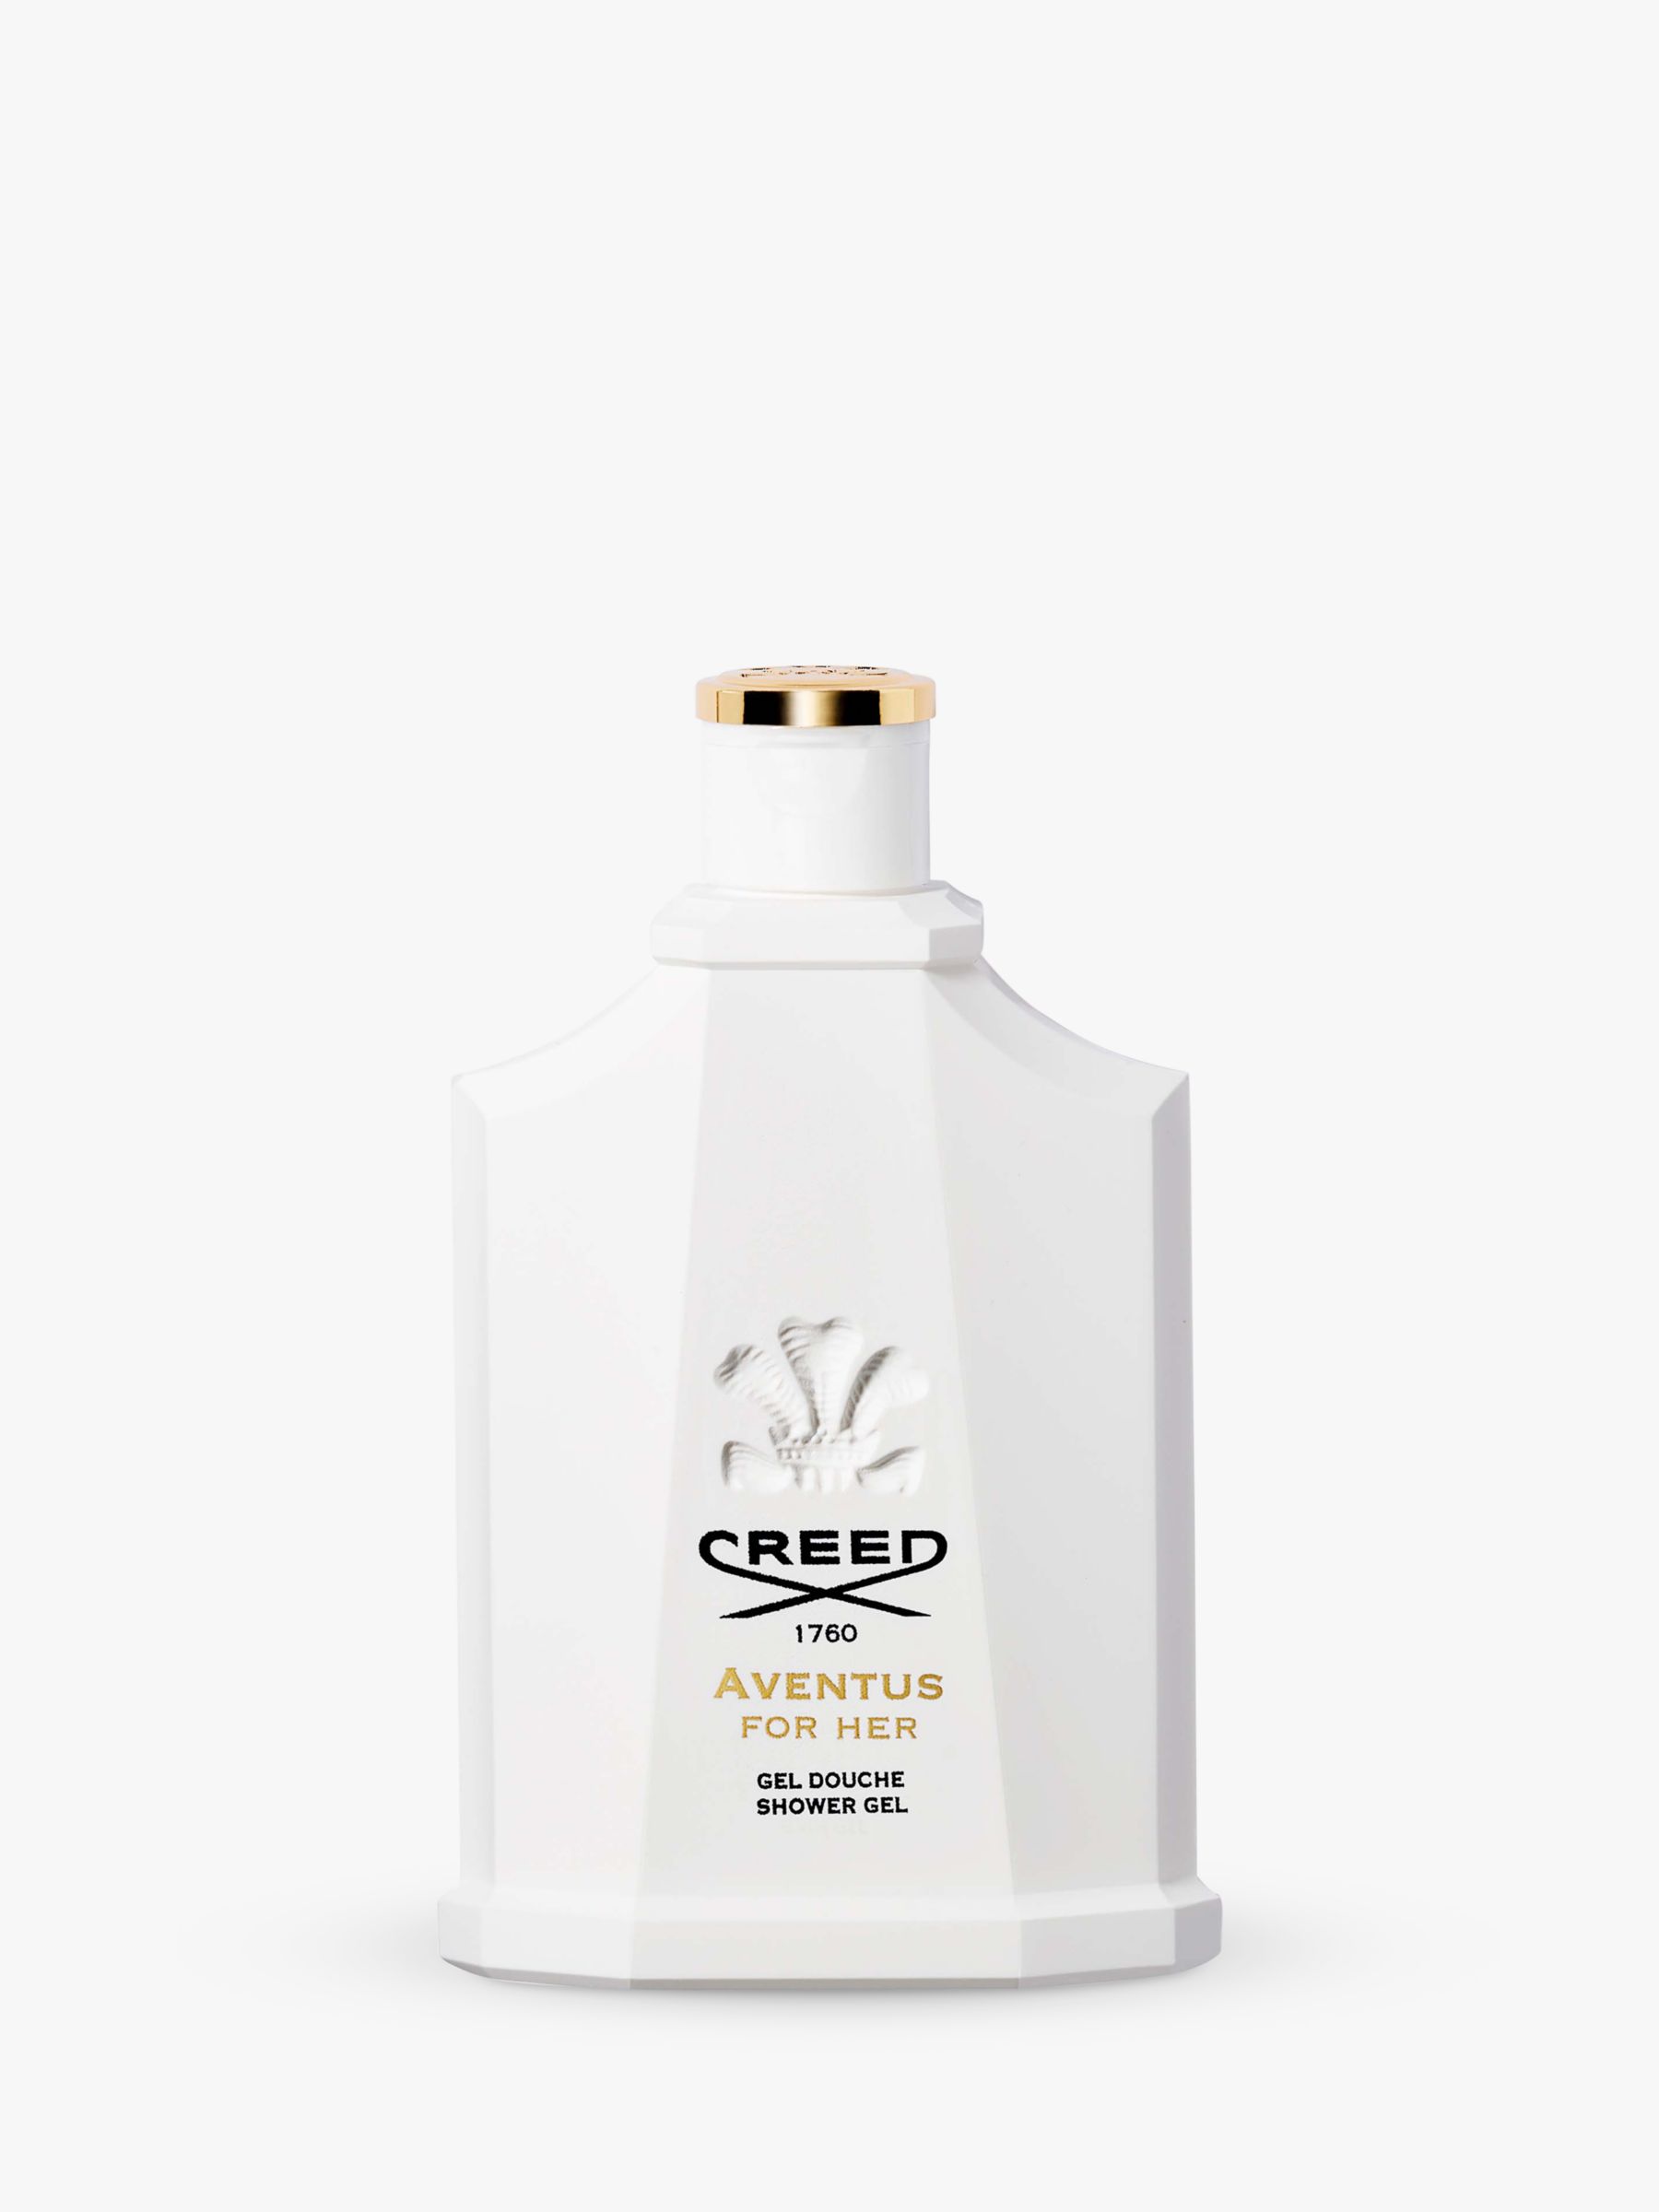 CREED Aventus For Her Shower Gel, 200ml 1